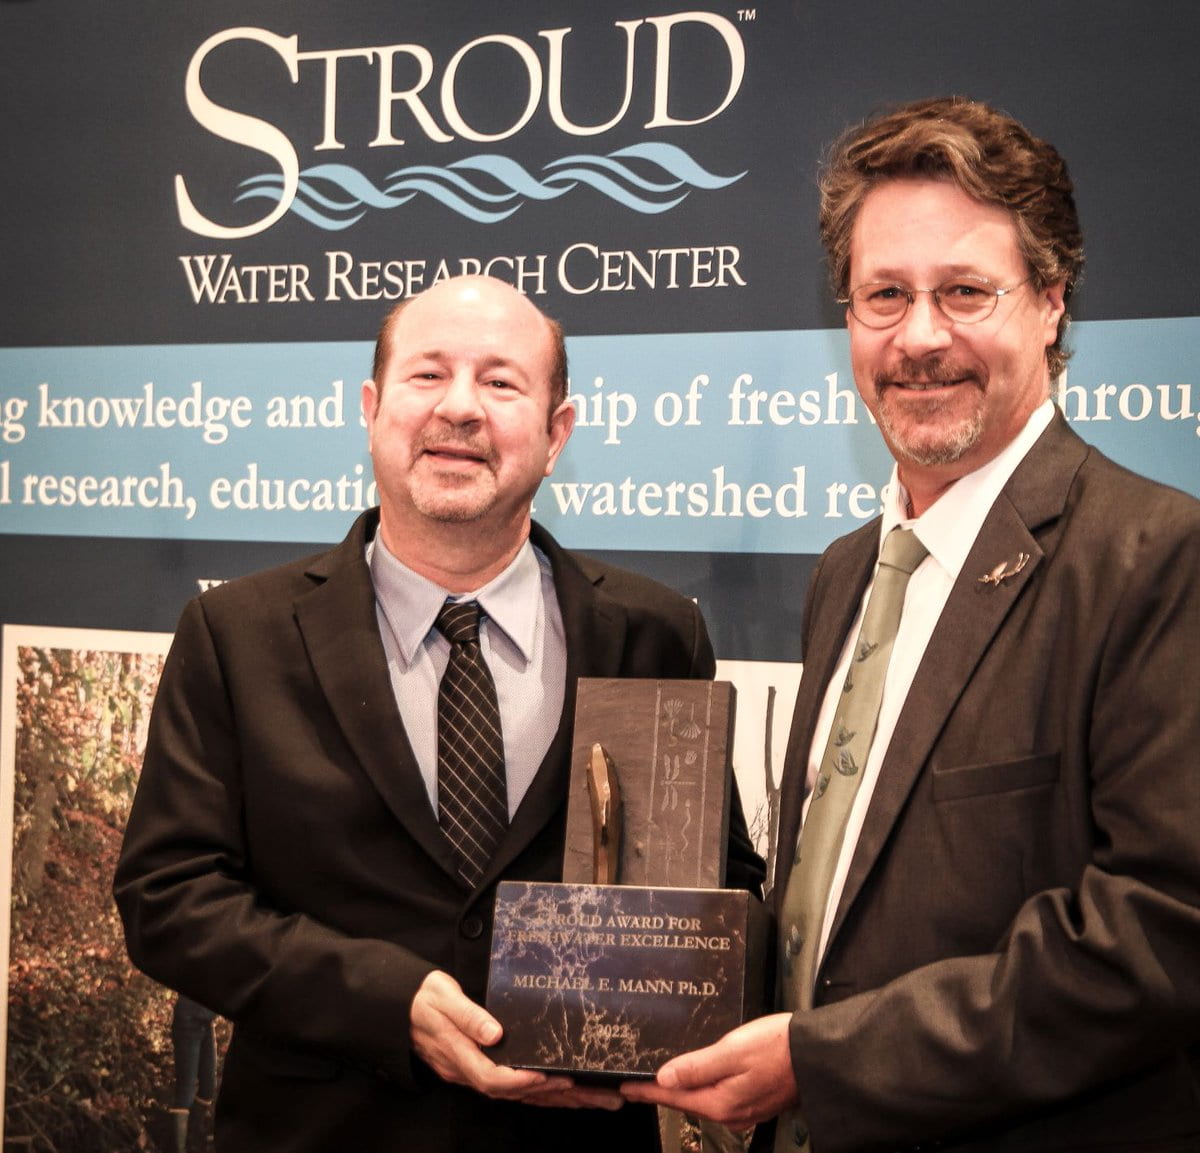 Michael E. Mann Honored With Stroud Award for Freshwater Excellence